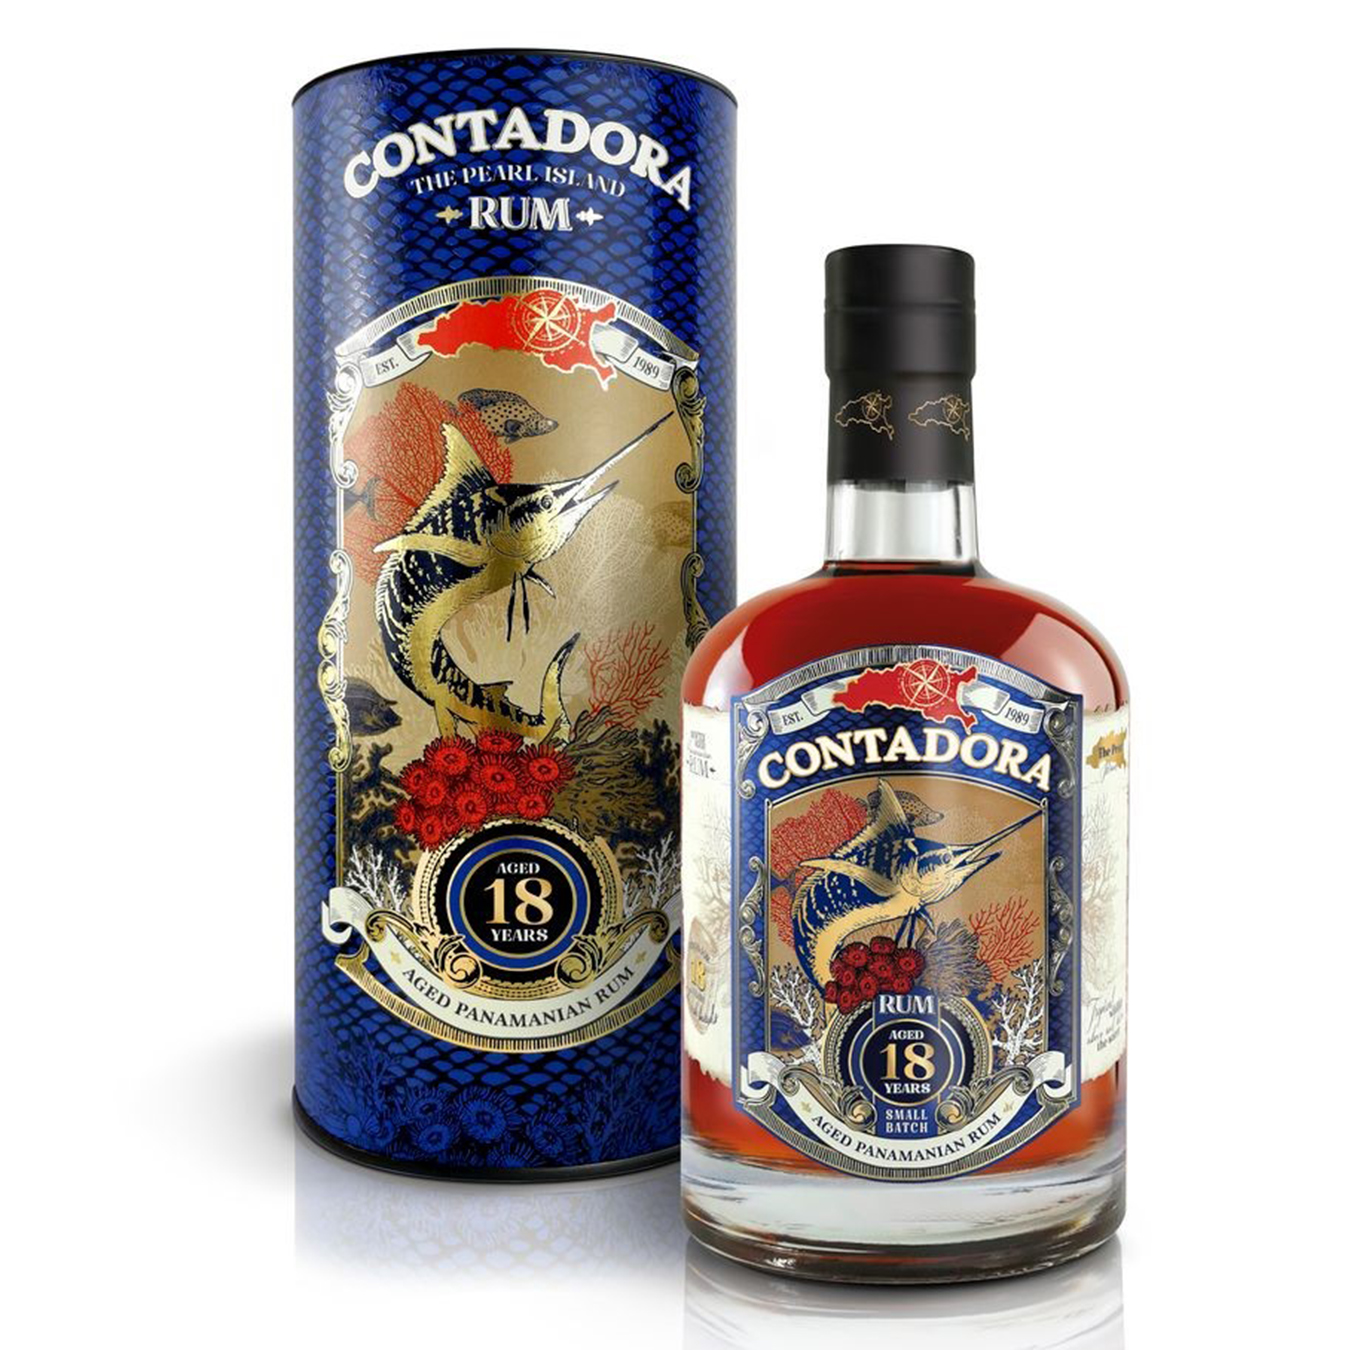 Rum Contadora 18 years old 40% 0.7l tube